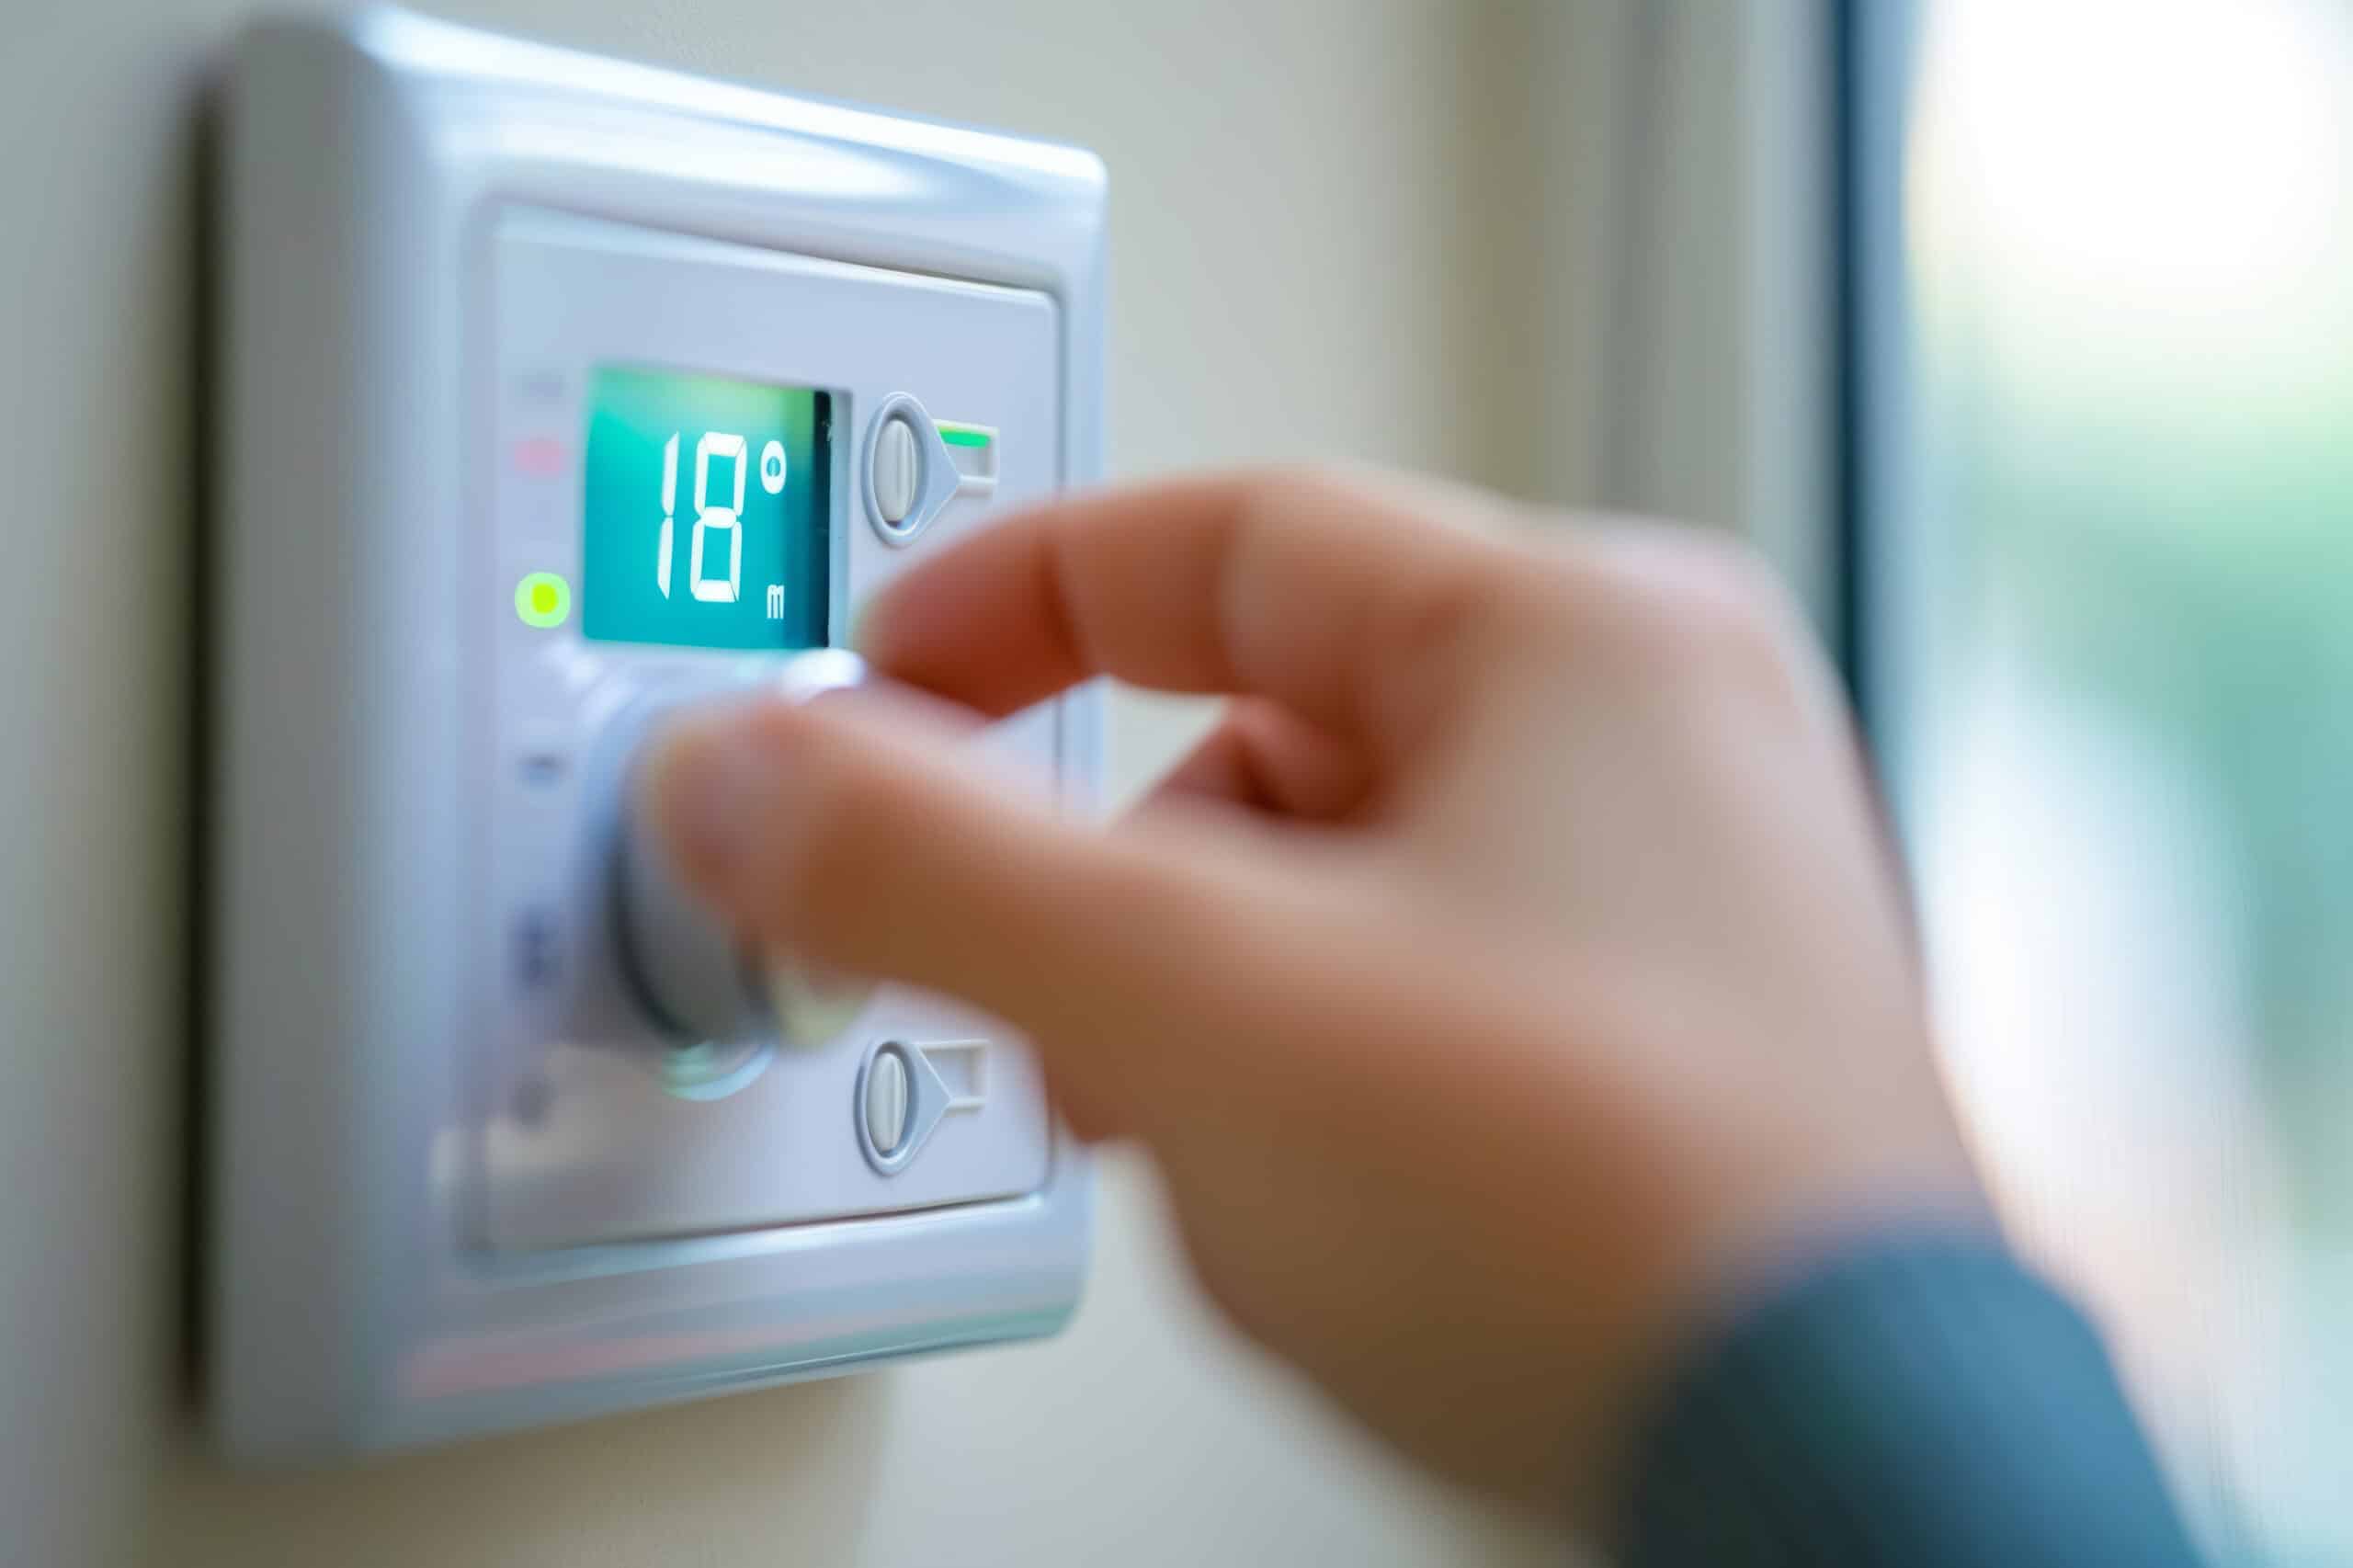 www.appr.com : How To Install Smart Thermostat?